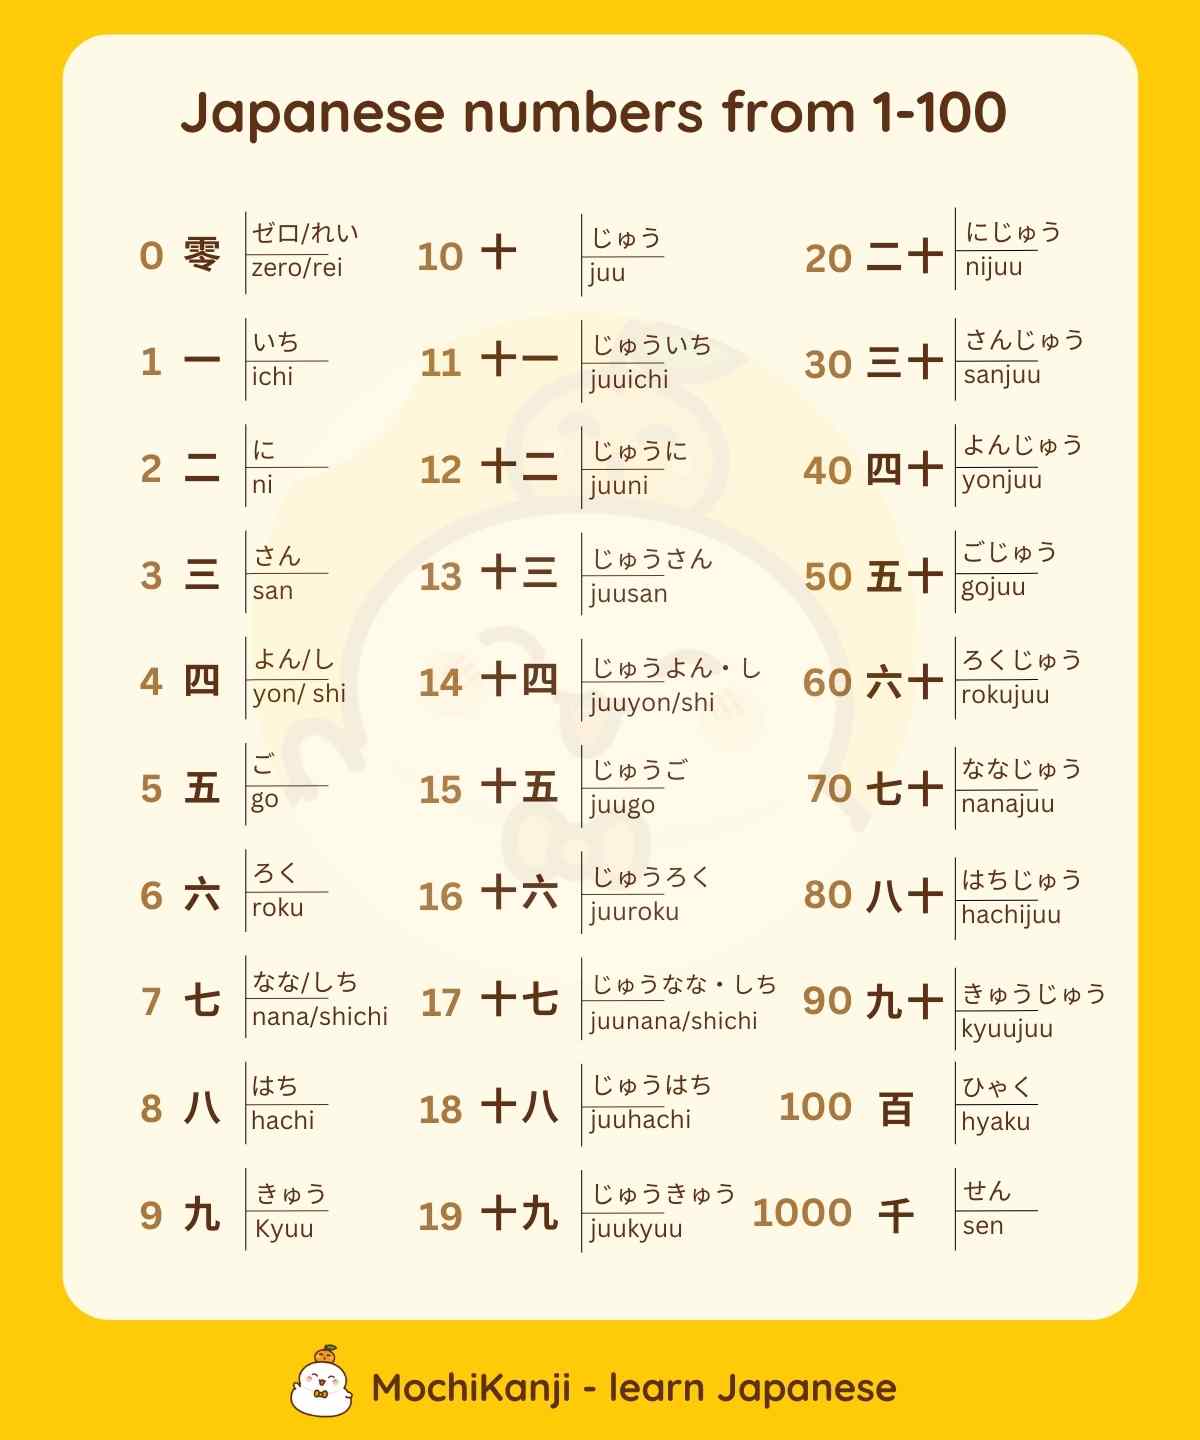 Japanese numbers from 0 to 100